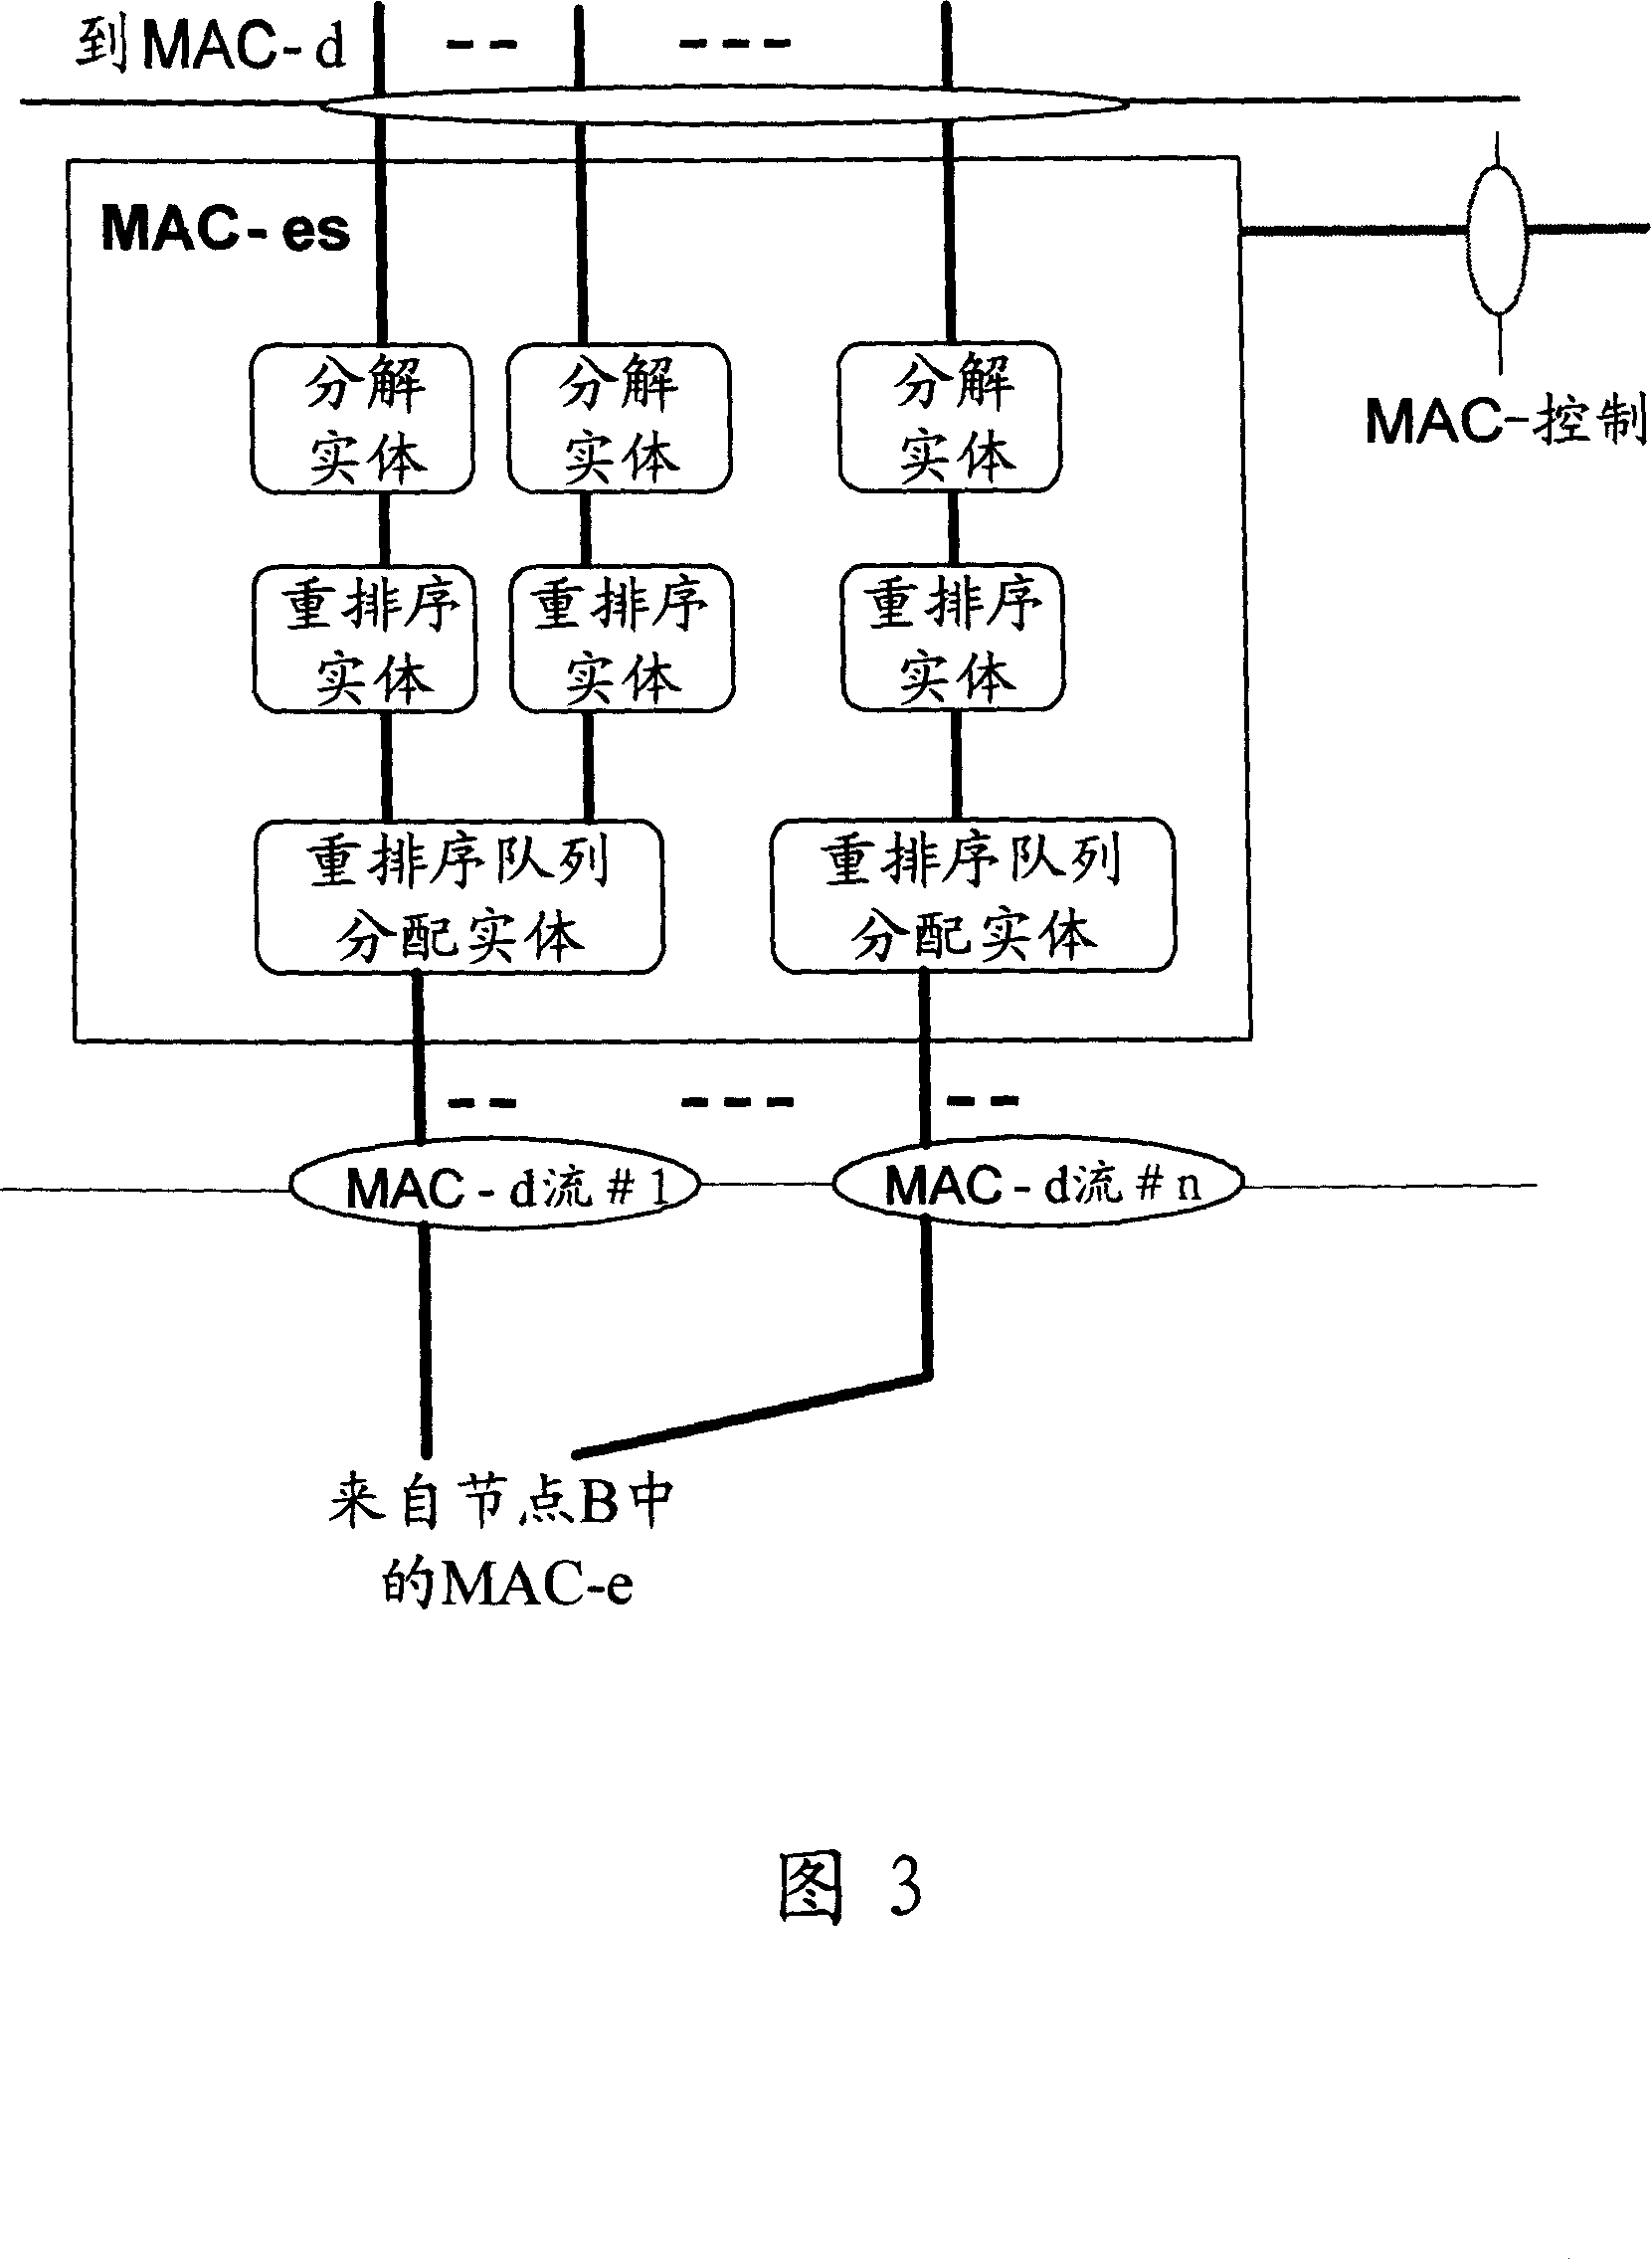 Method and system for implementing high-speed ascending grouping access characteristic